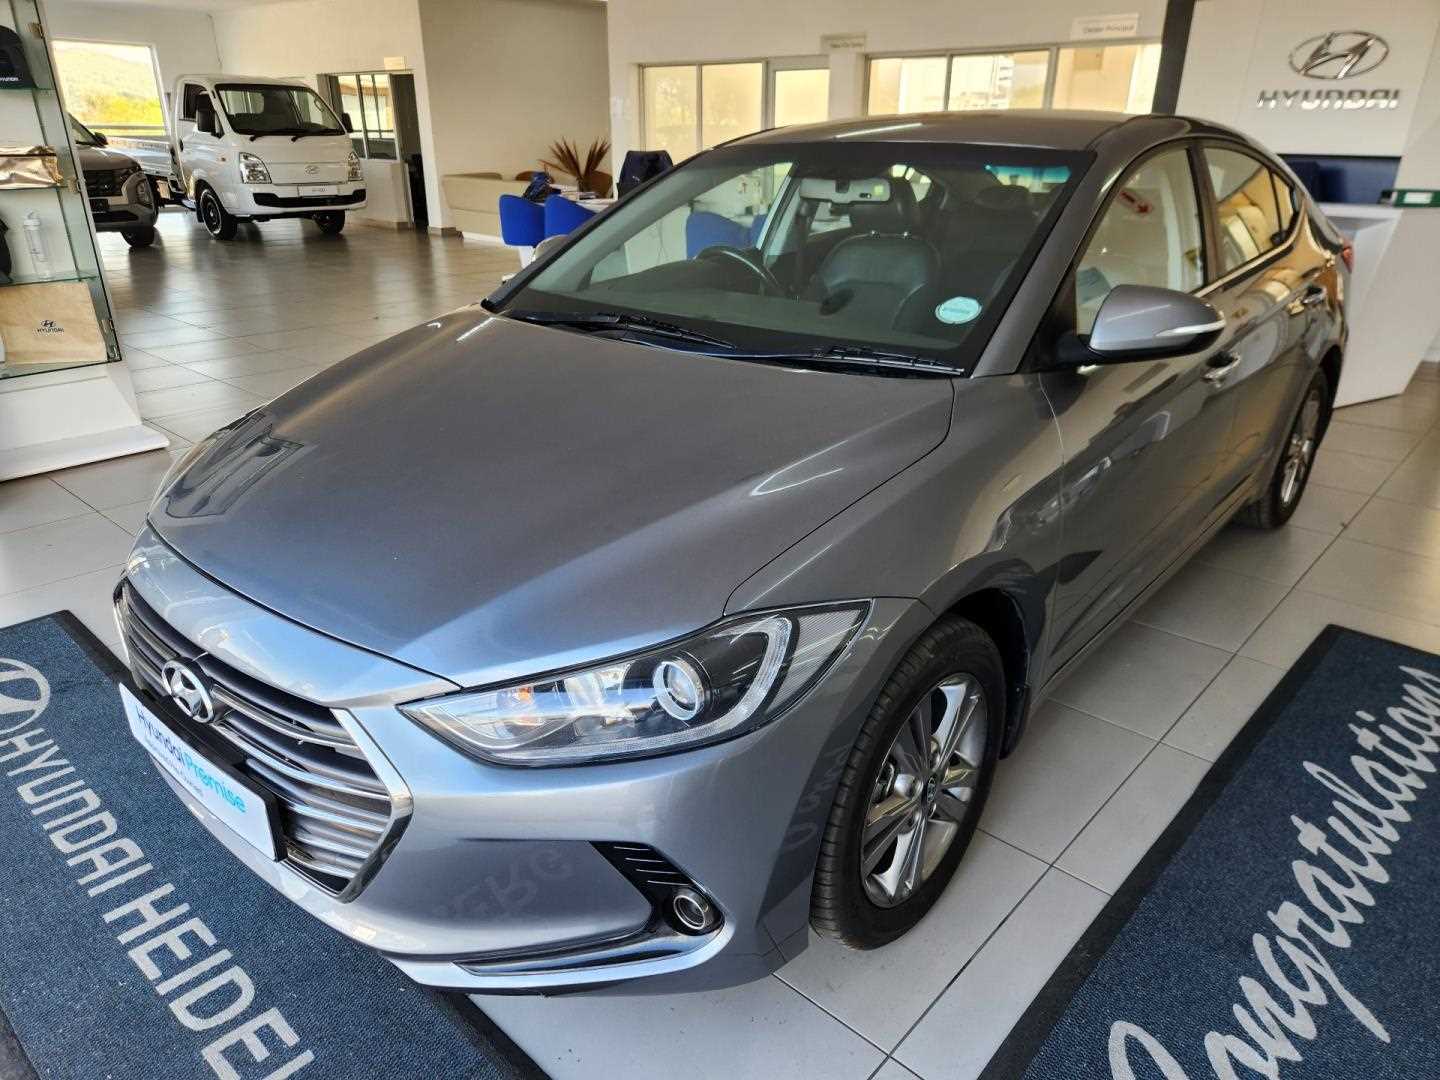 Hyundai ELANTRA 1.6 EXECUTIVE A/T for Sale in South Africa